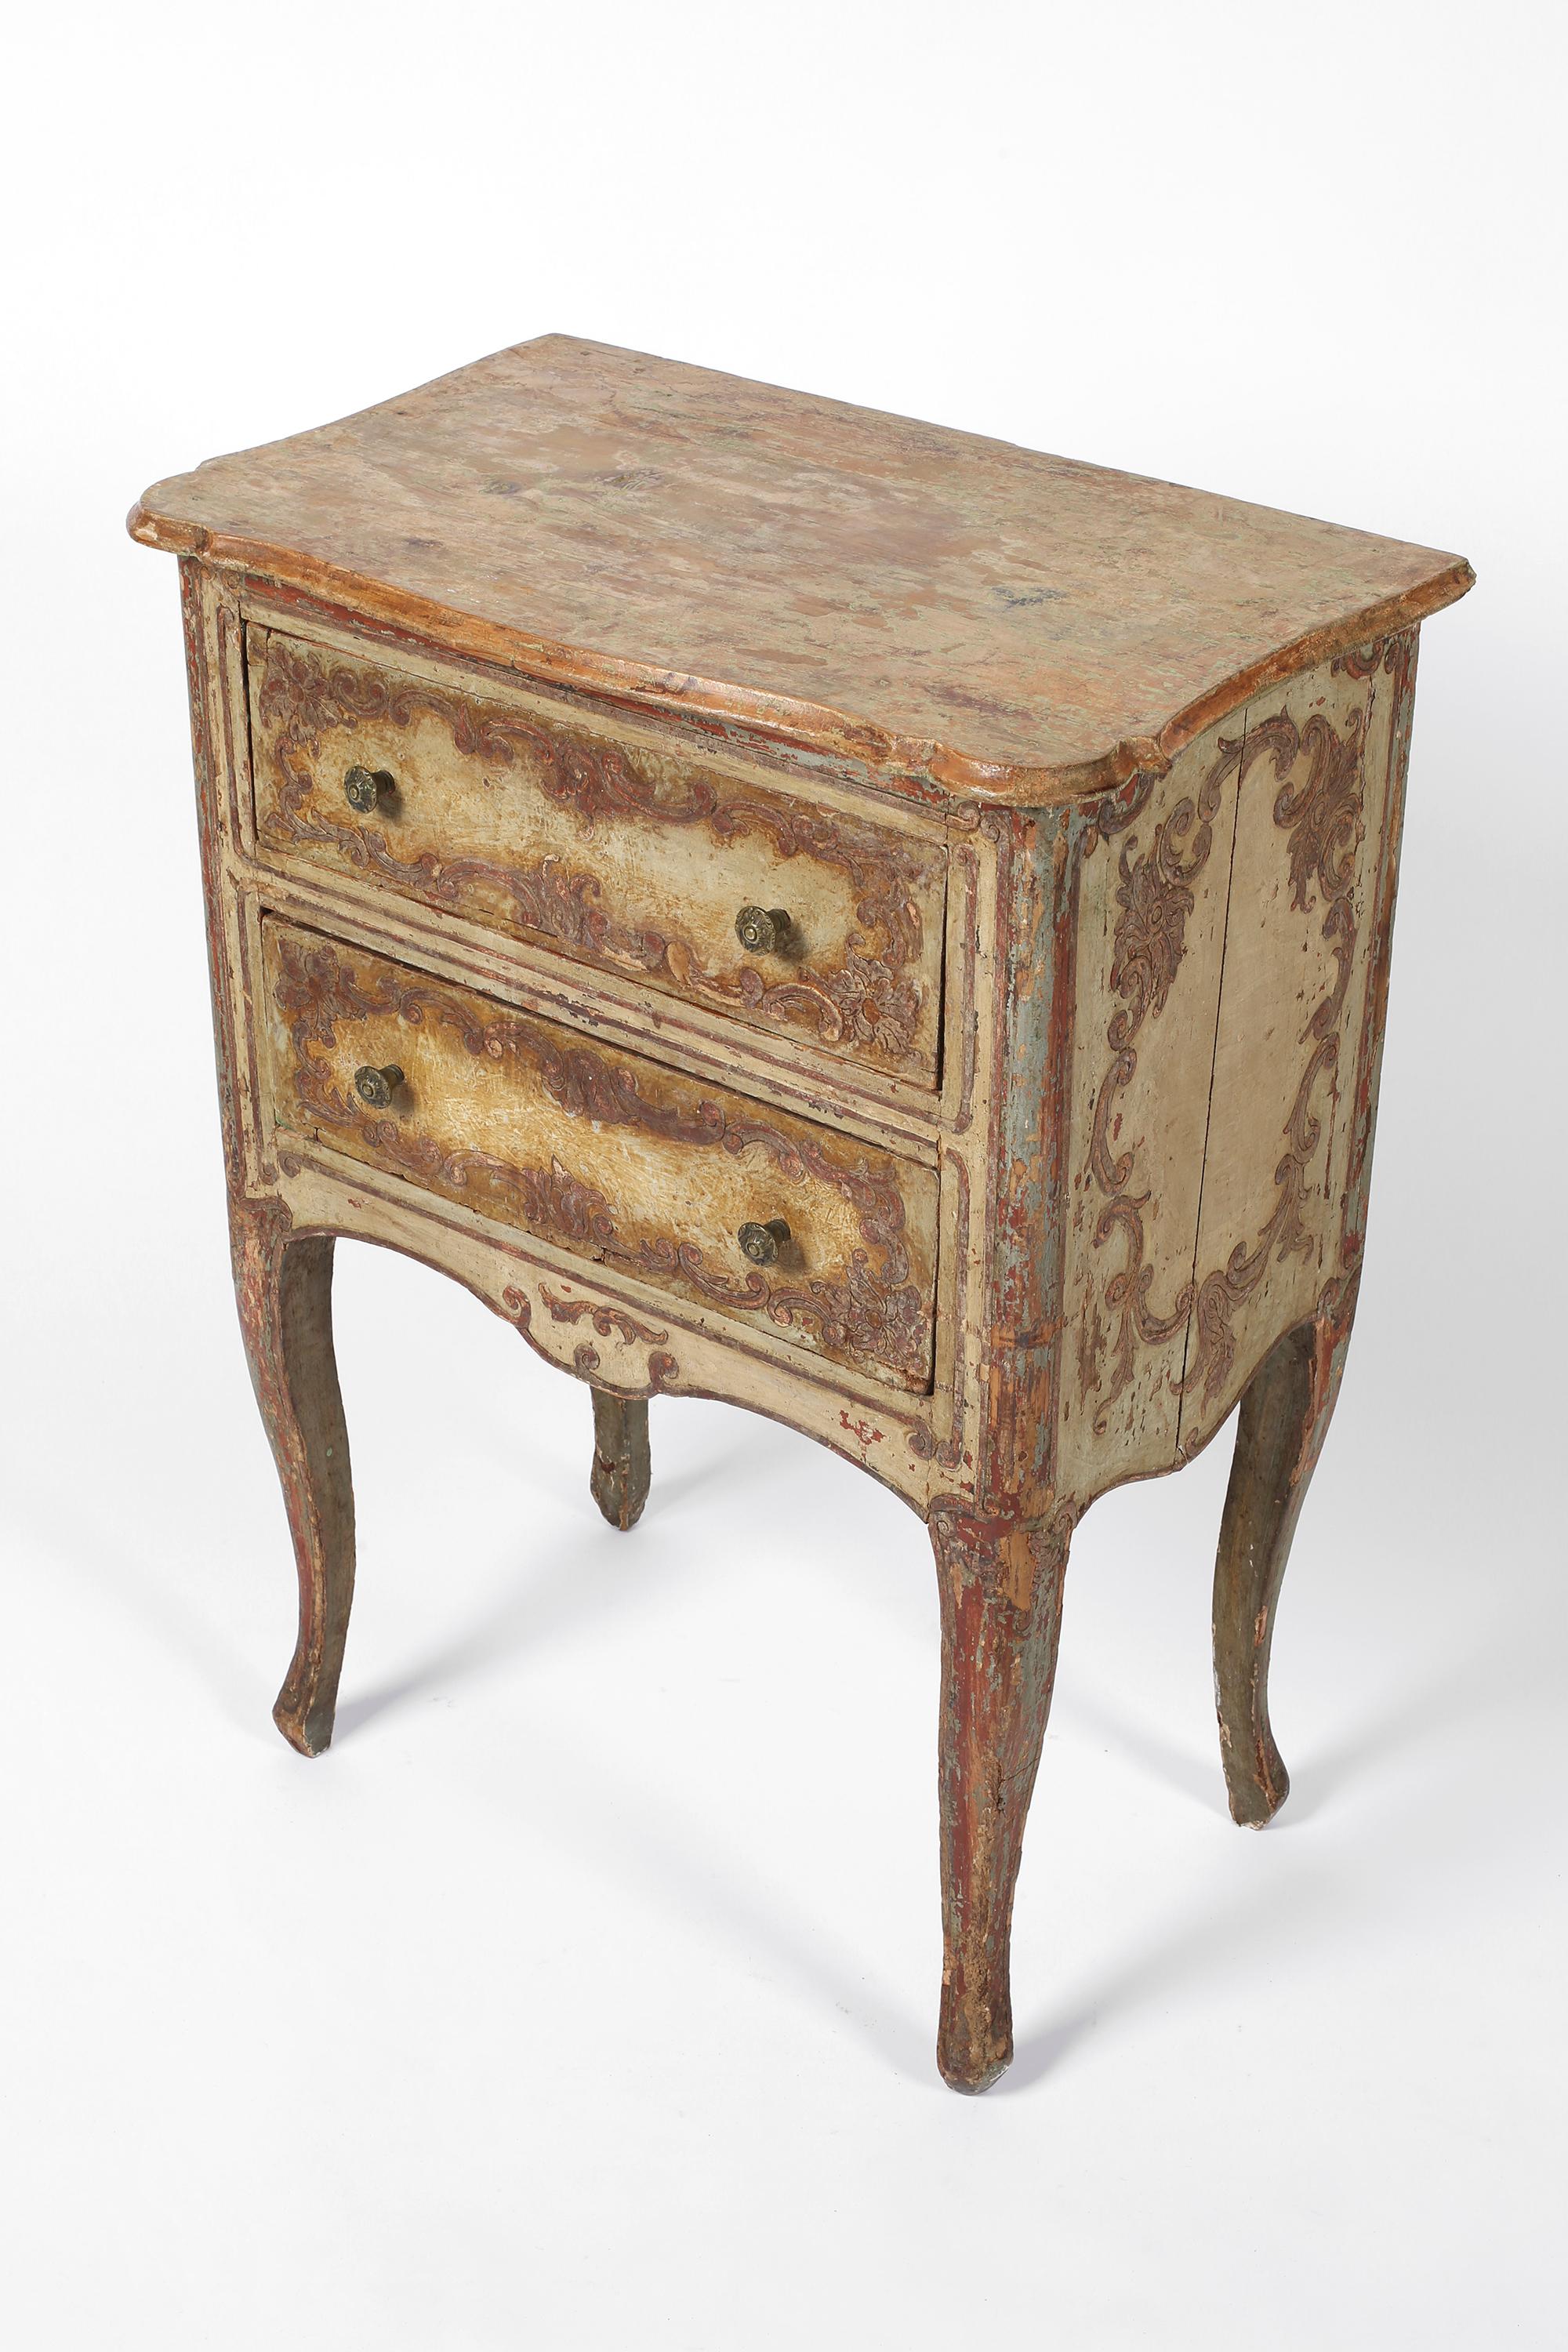 Early 19th Century Italian Florentine Painted Side Table Chest Bedside For Sale 4